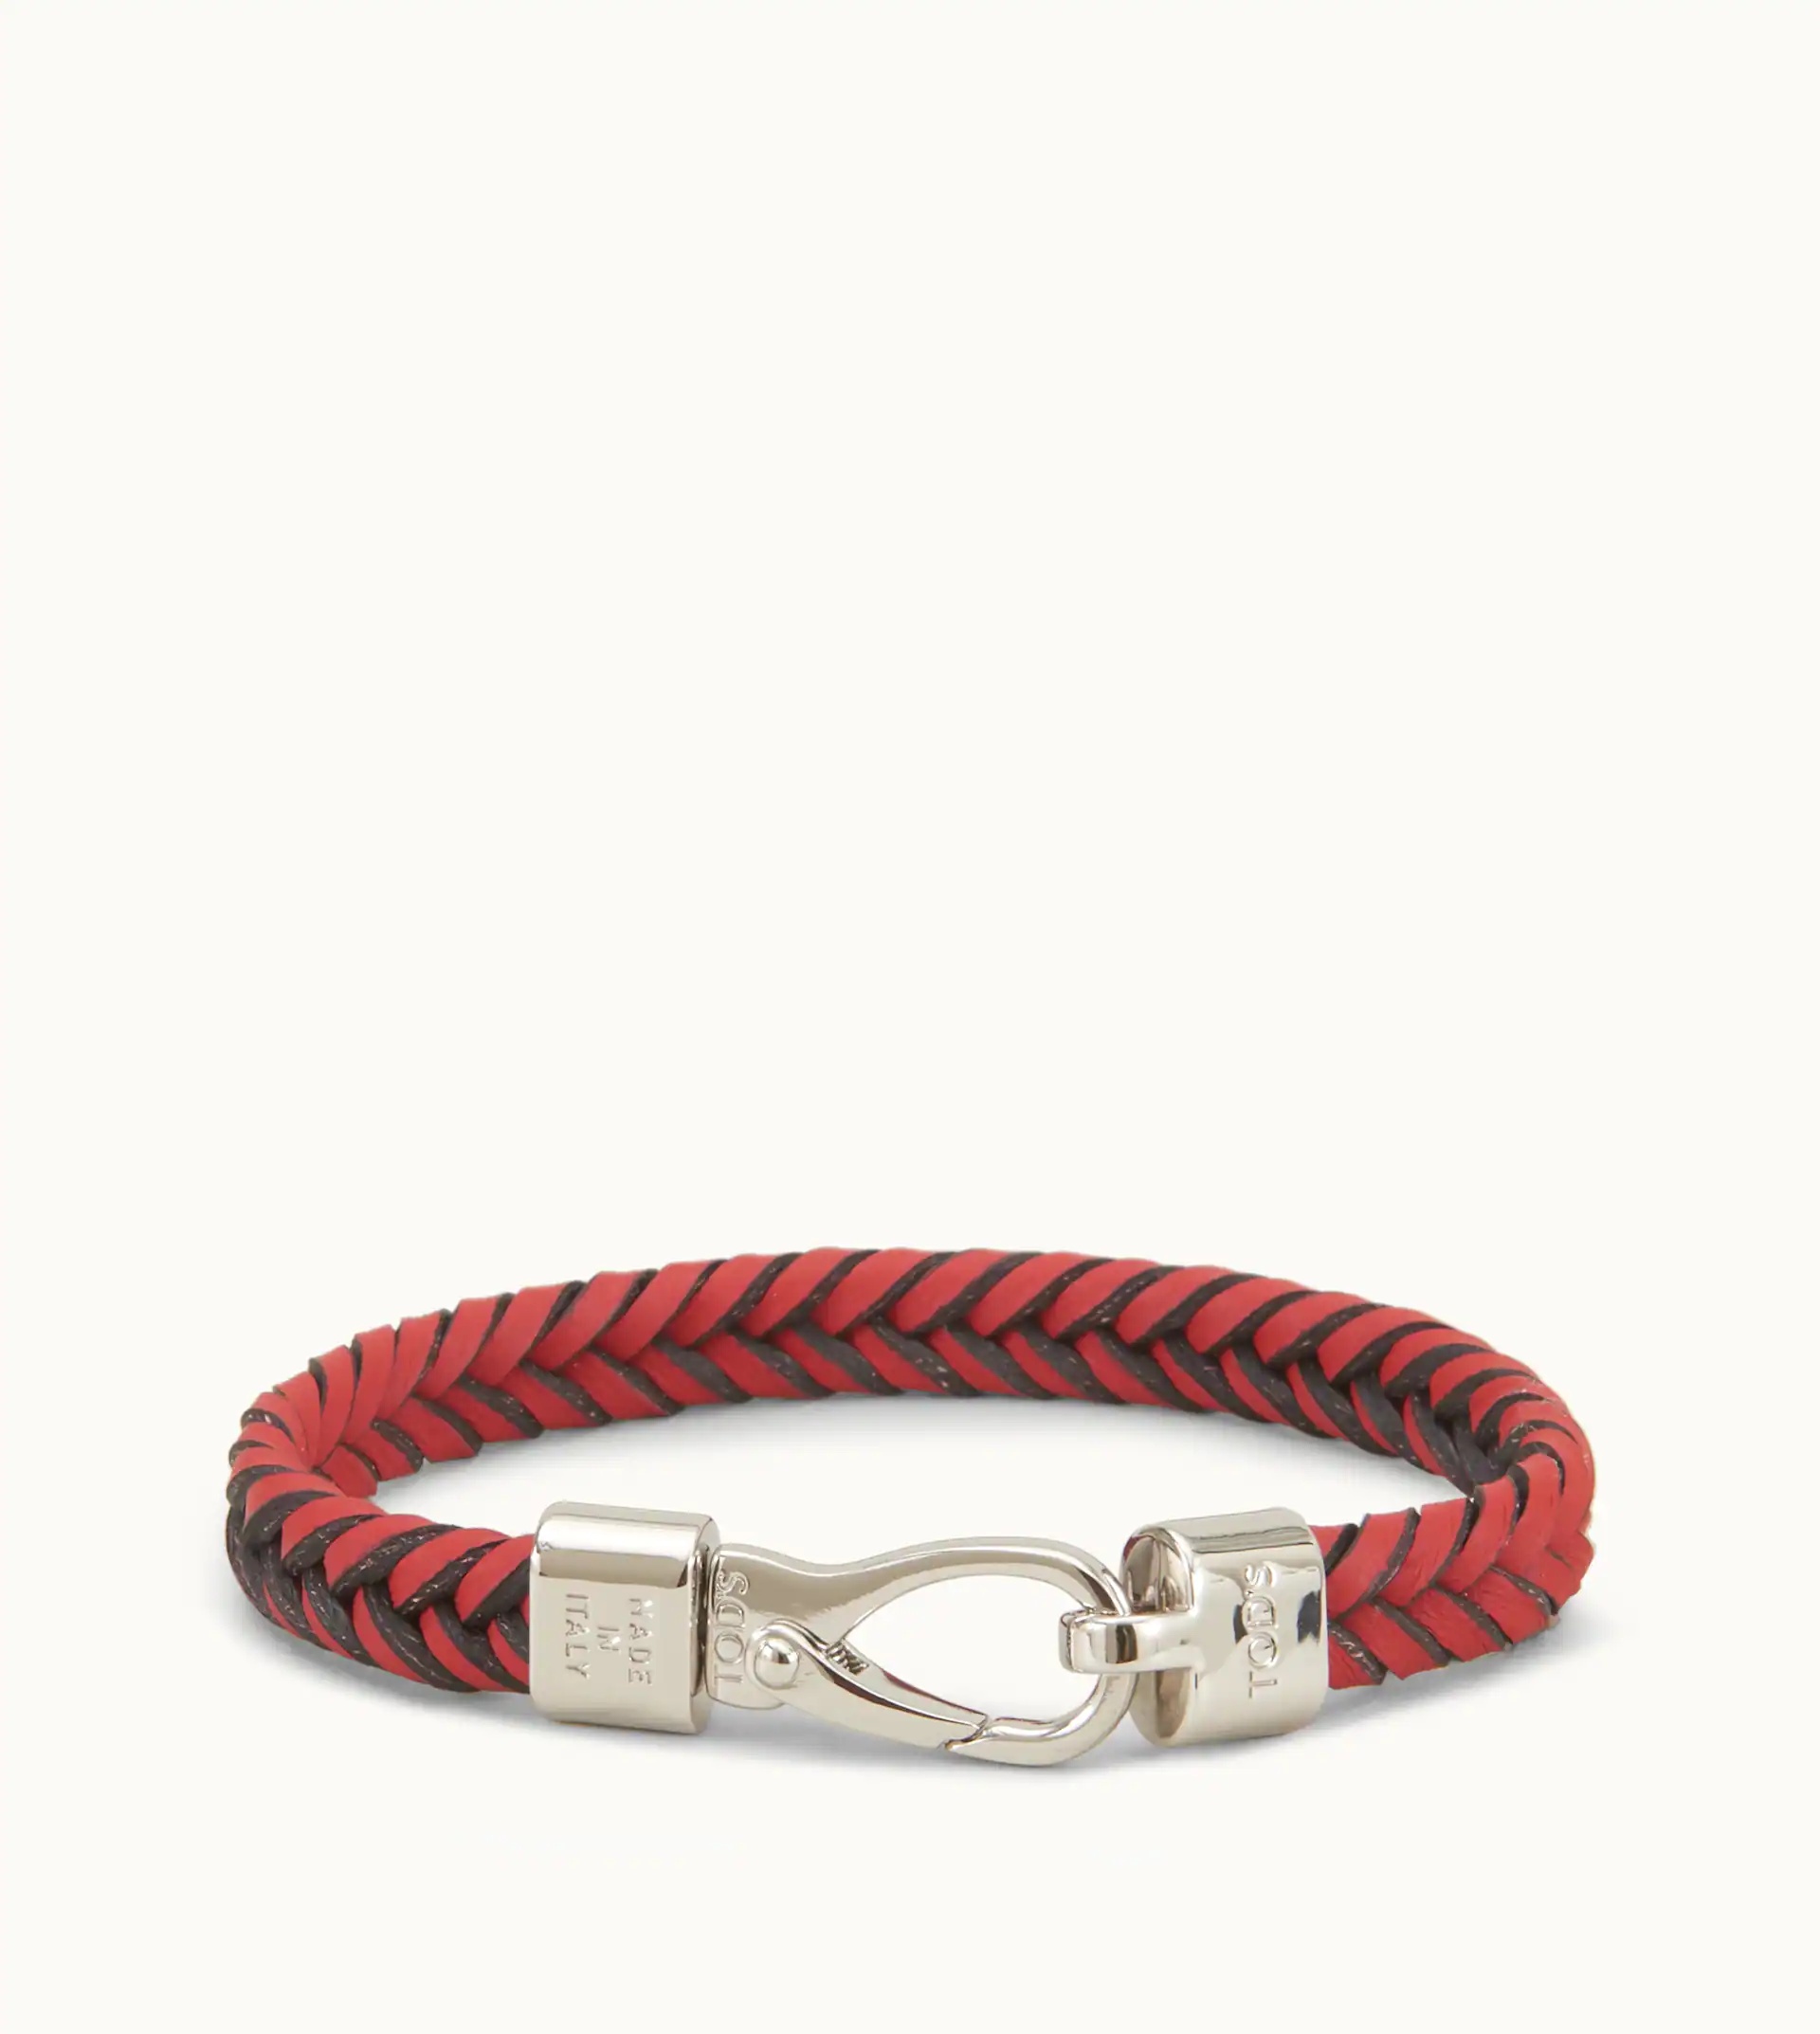 BRACELET IN LEATHER - RED - 1